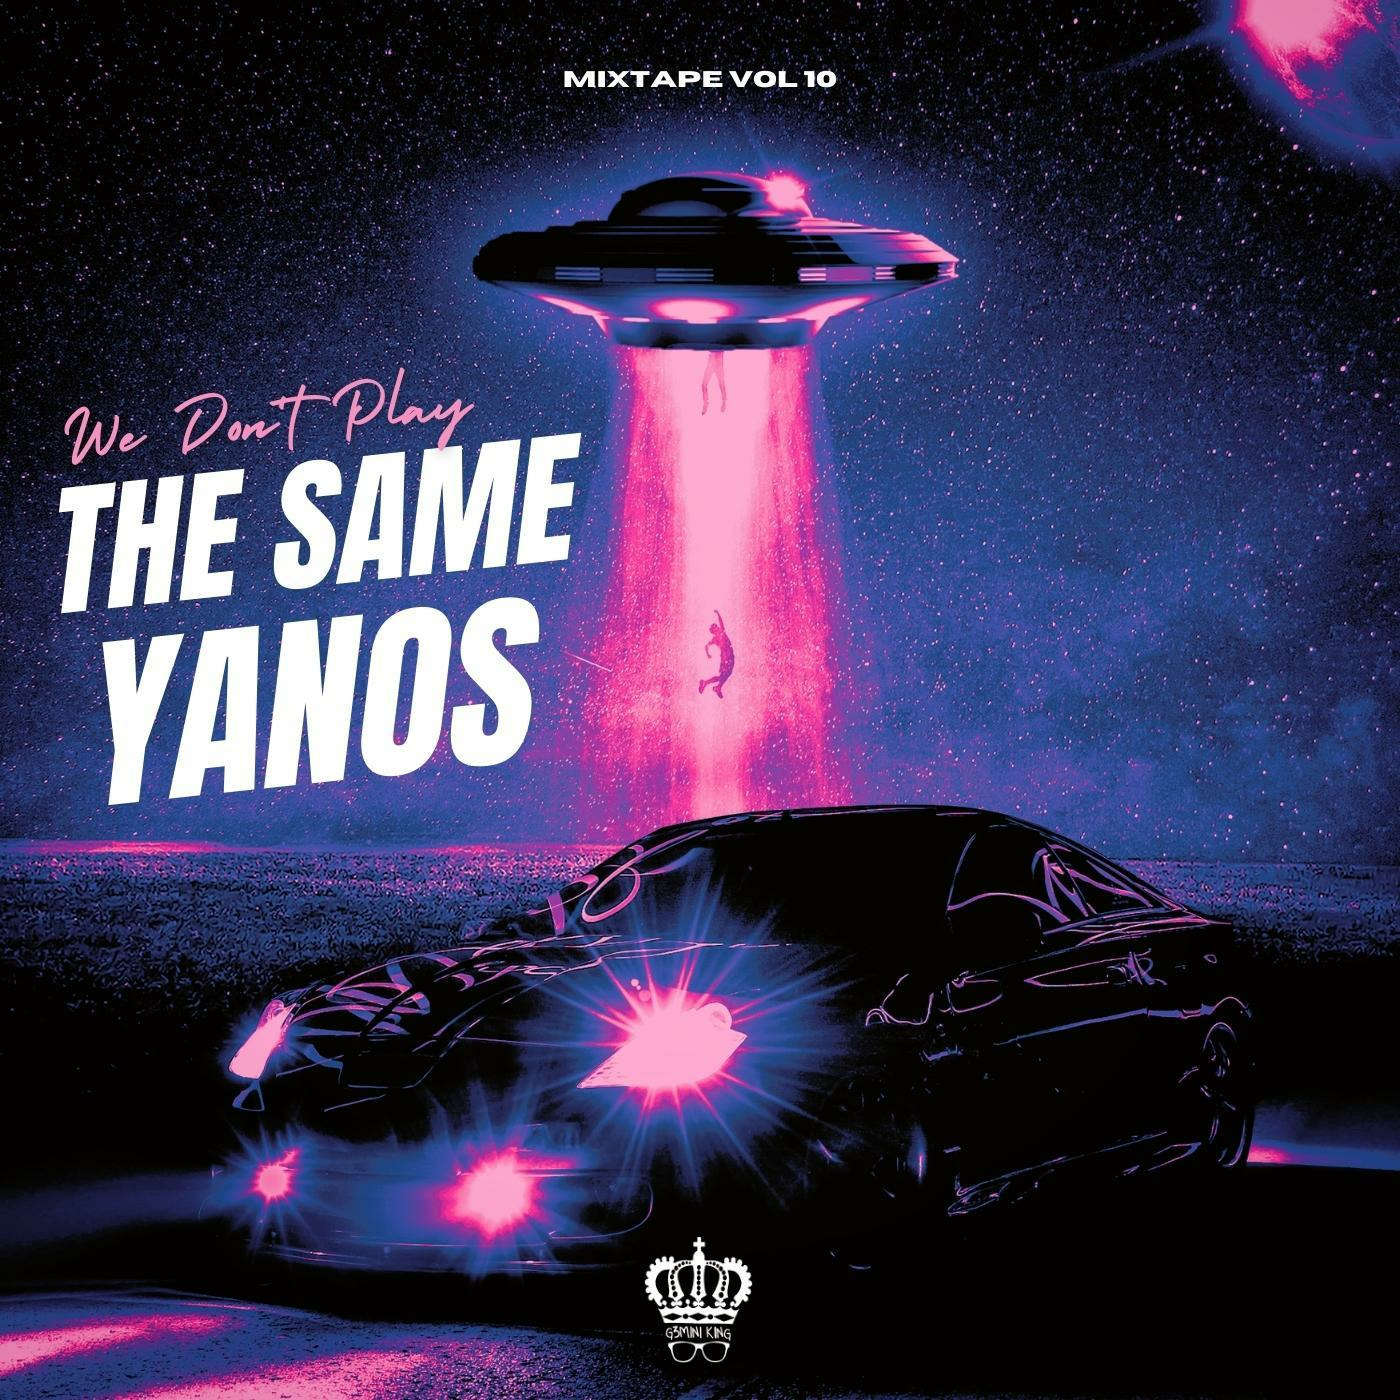 We Don't Play The Same Yanos™ Vol. 10 (Mixed by G3MINI K1NG) [Strictly MDU a.k.a TRP, Bongza, Semi Tee, Tribesoul, Nkulee501 & Skroef 28]